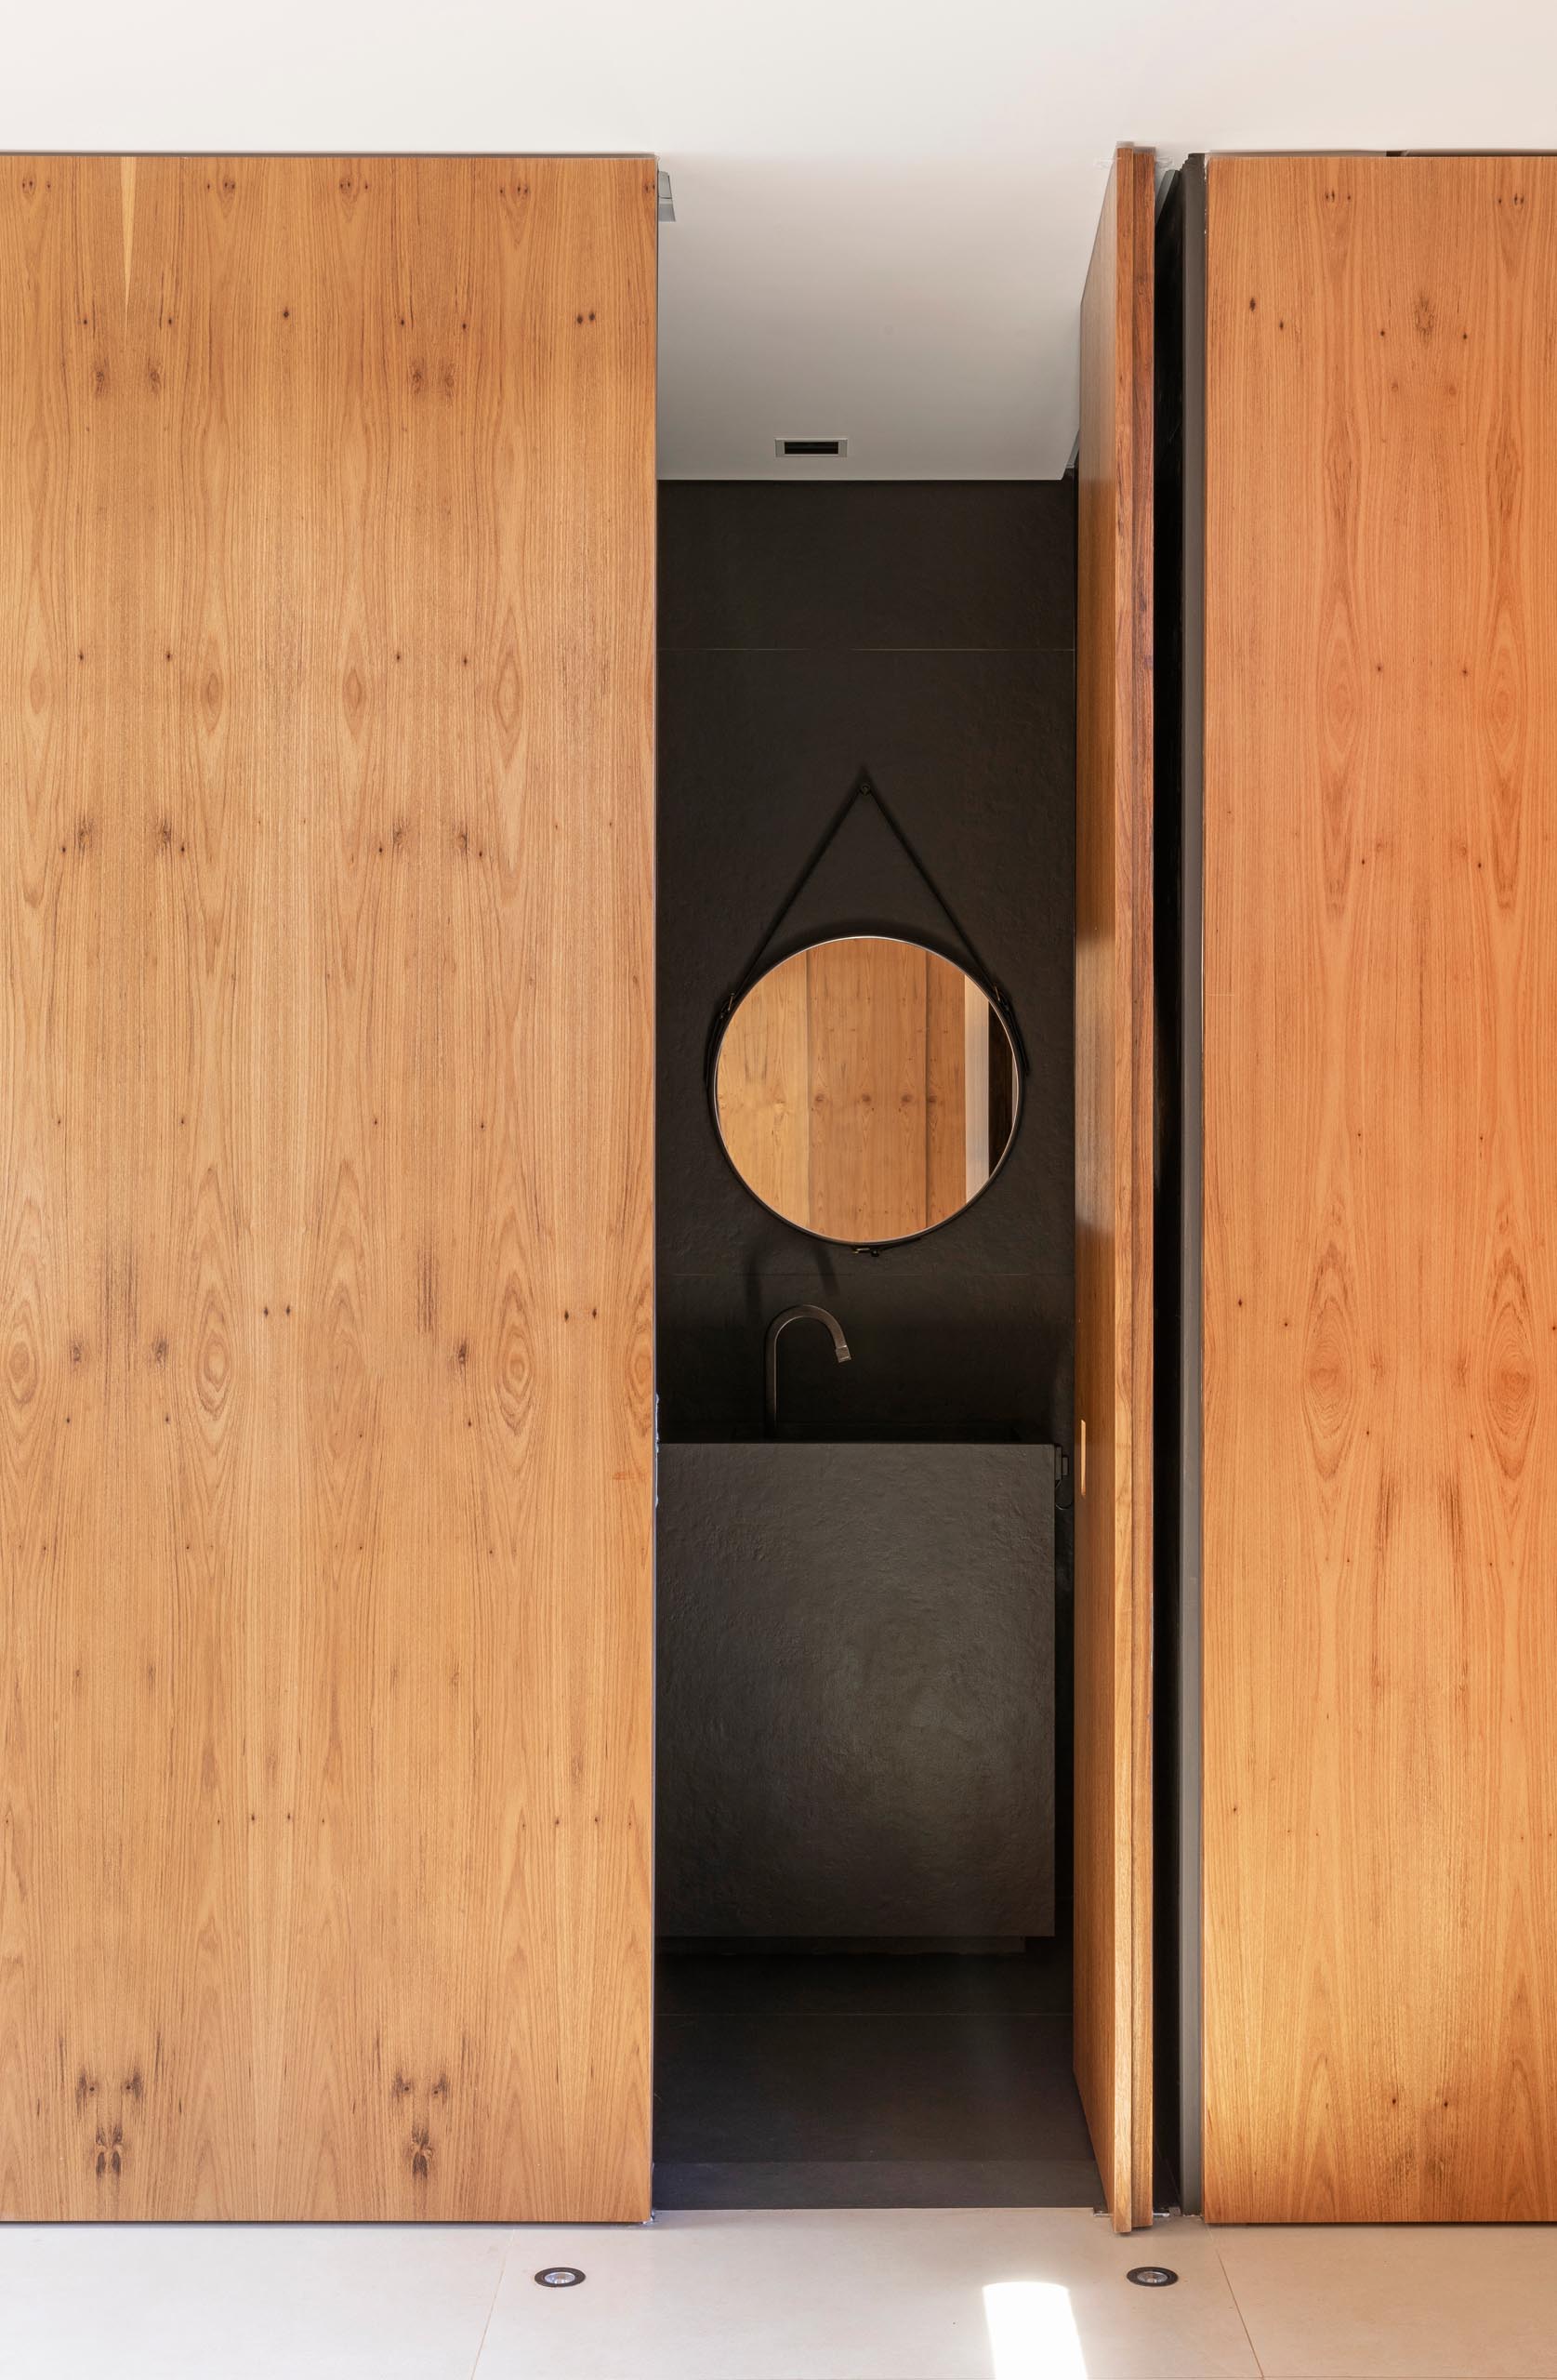 A modern bathroom with a dark color palette is hidden behind a wood door that matches the surrounding wall.